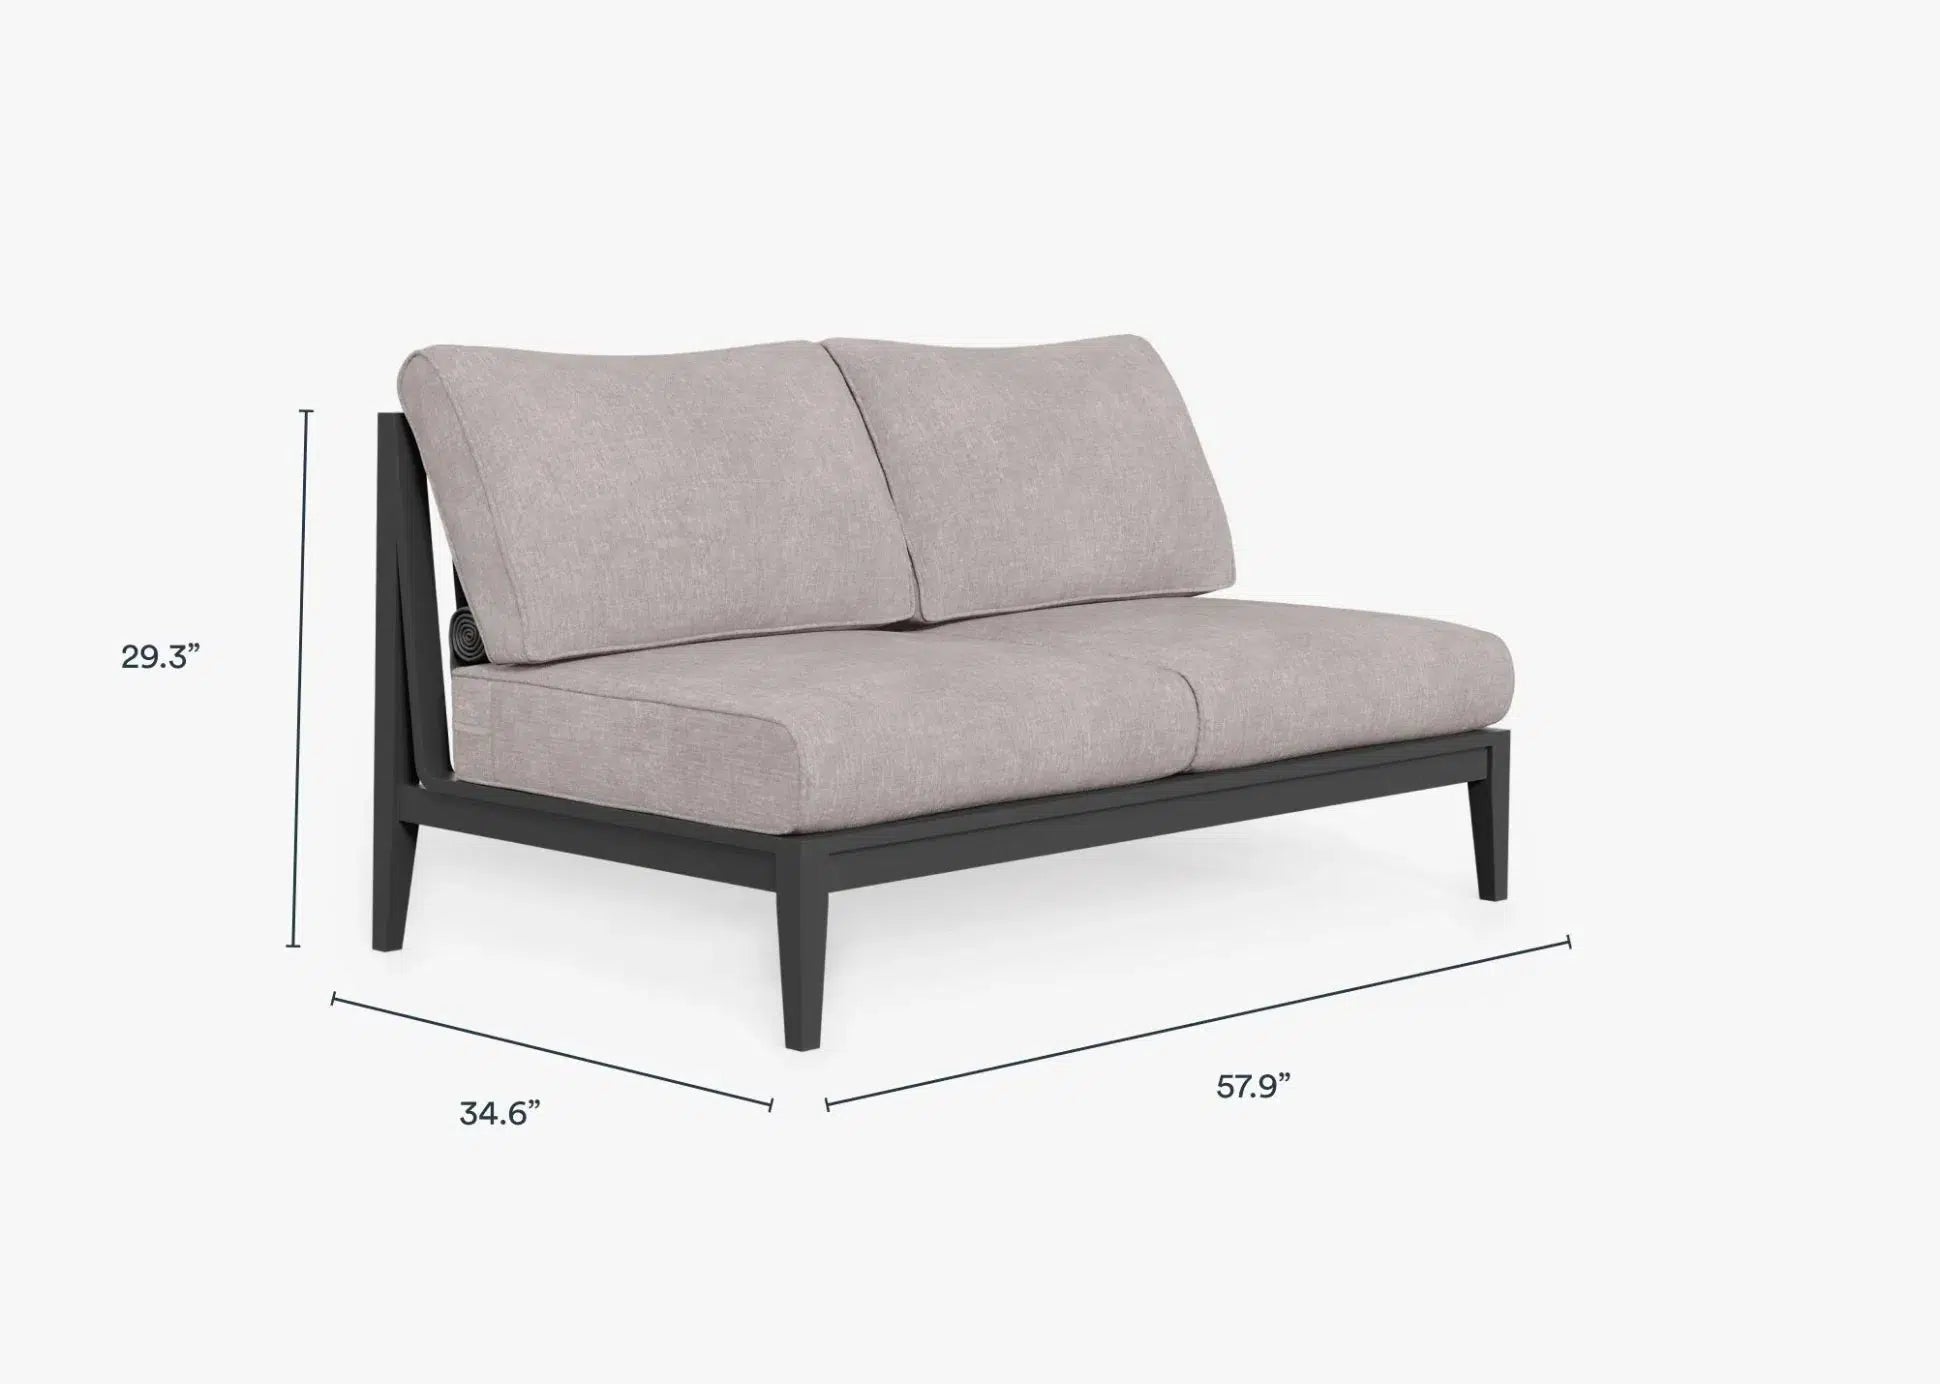 Live Outer 58" Charcoal Aluminum Outdoor Armless Loveseat With Sandstone Gray Cushion